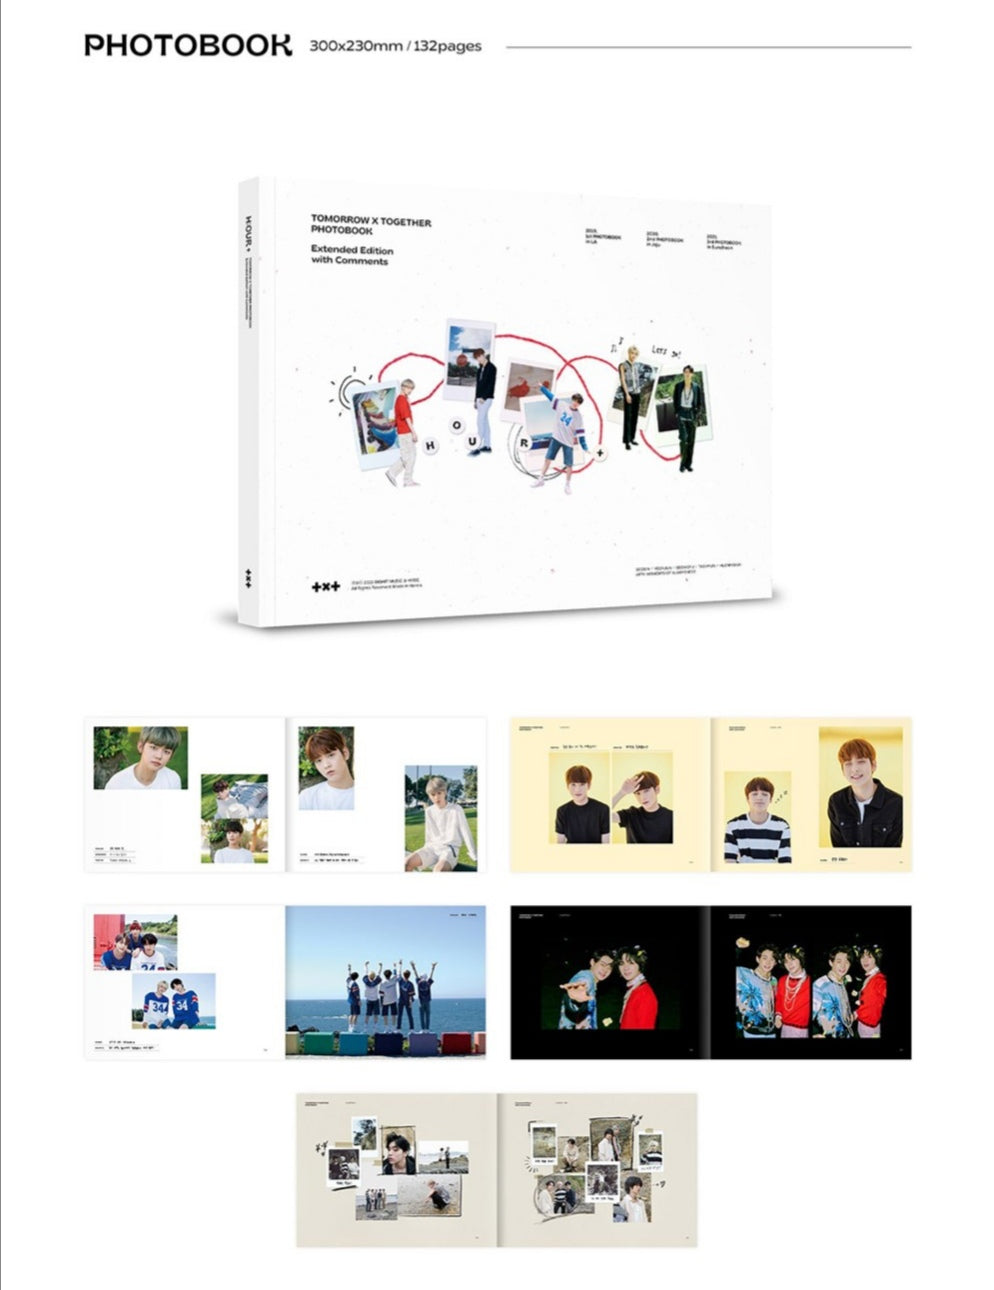 [PREORDER] TXT - H:OUR SET (3RD PHOTOBOOK + EXTENDED EDITION)